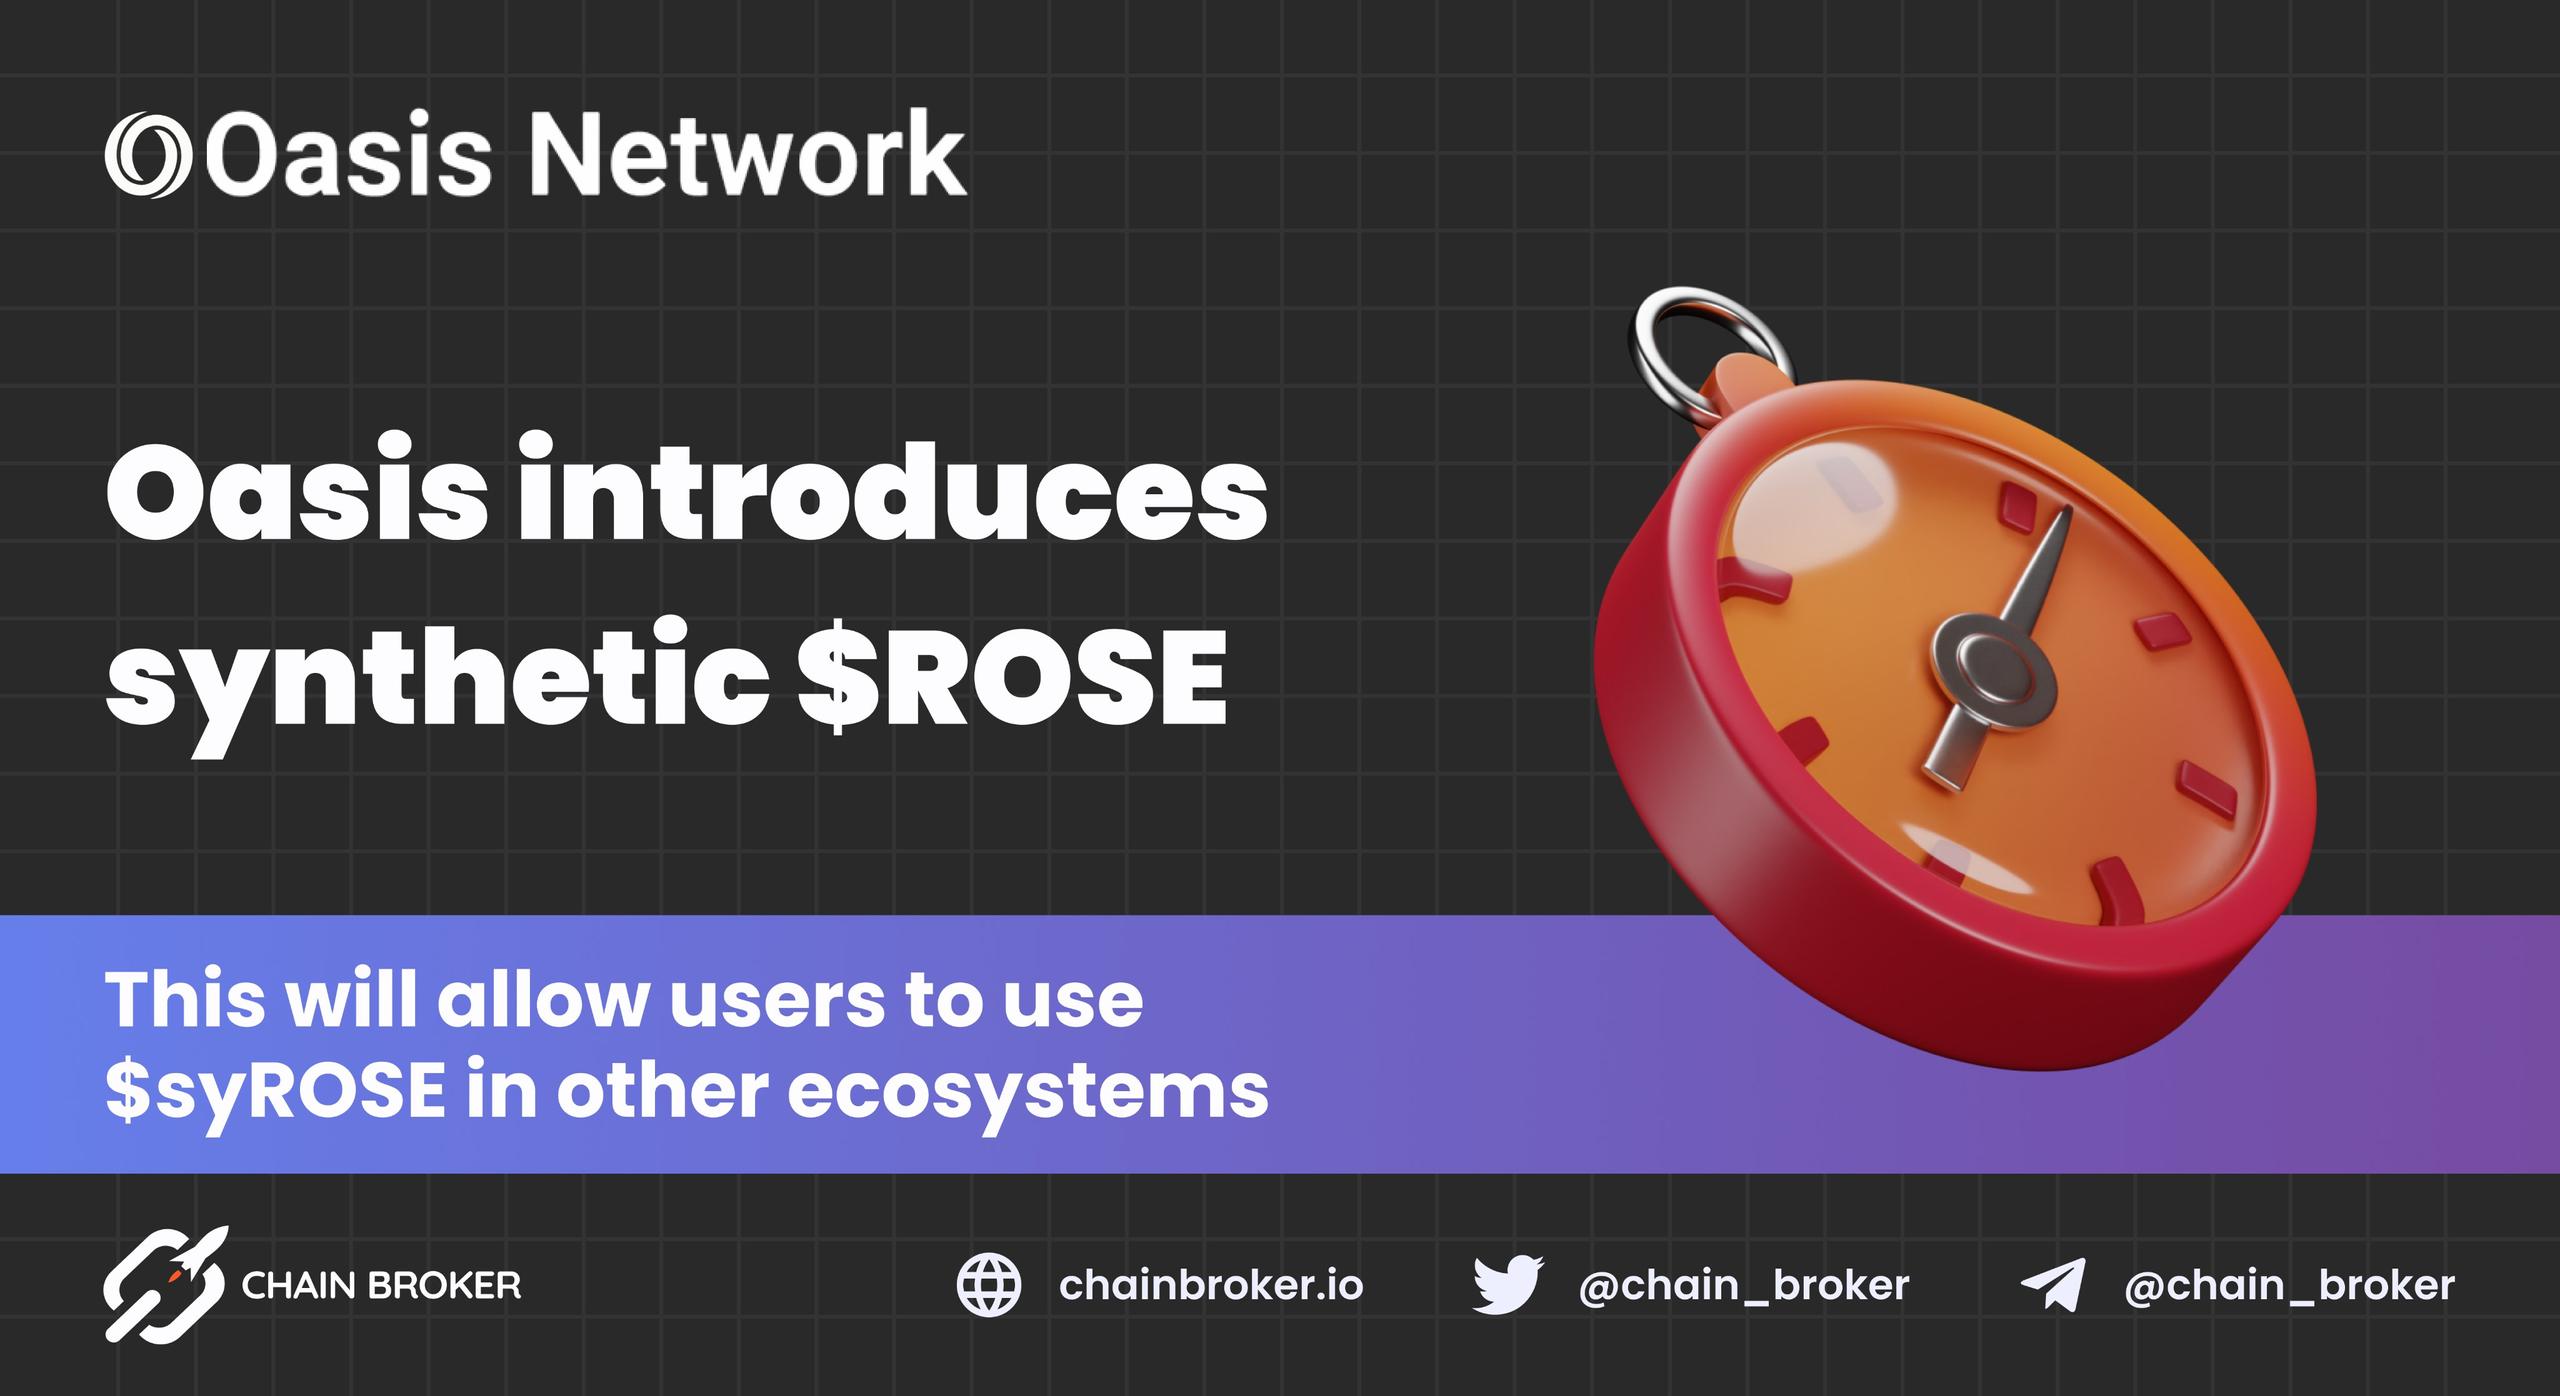 Oasis Network introduces synthetic $ROSE